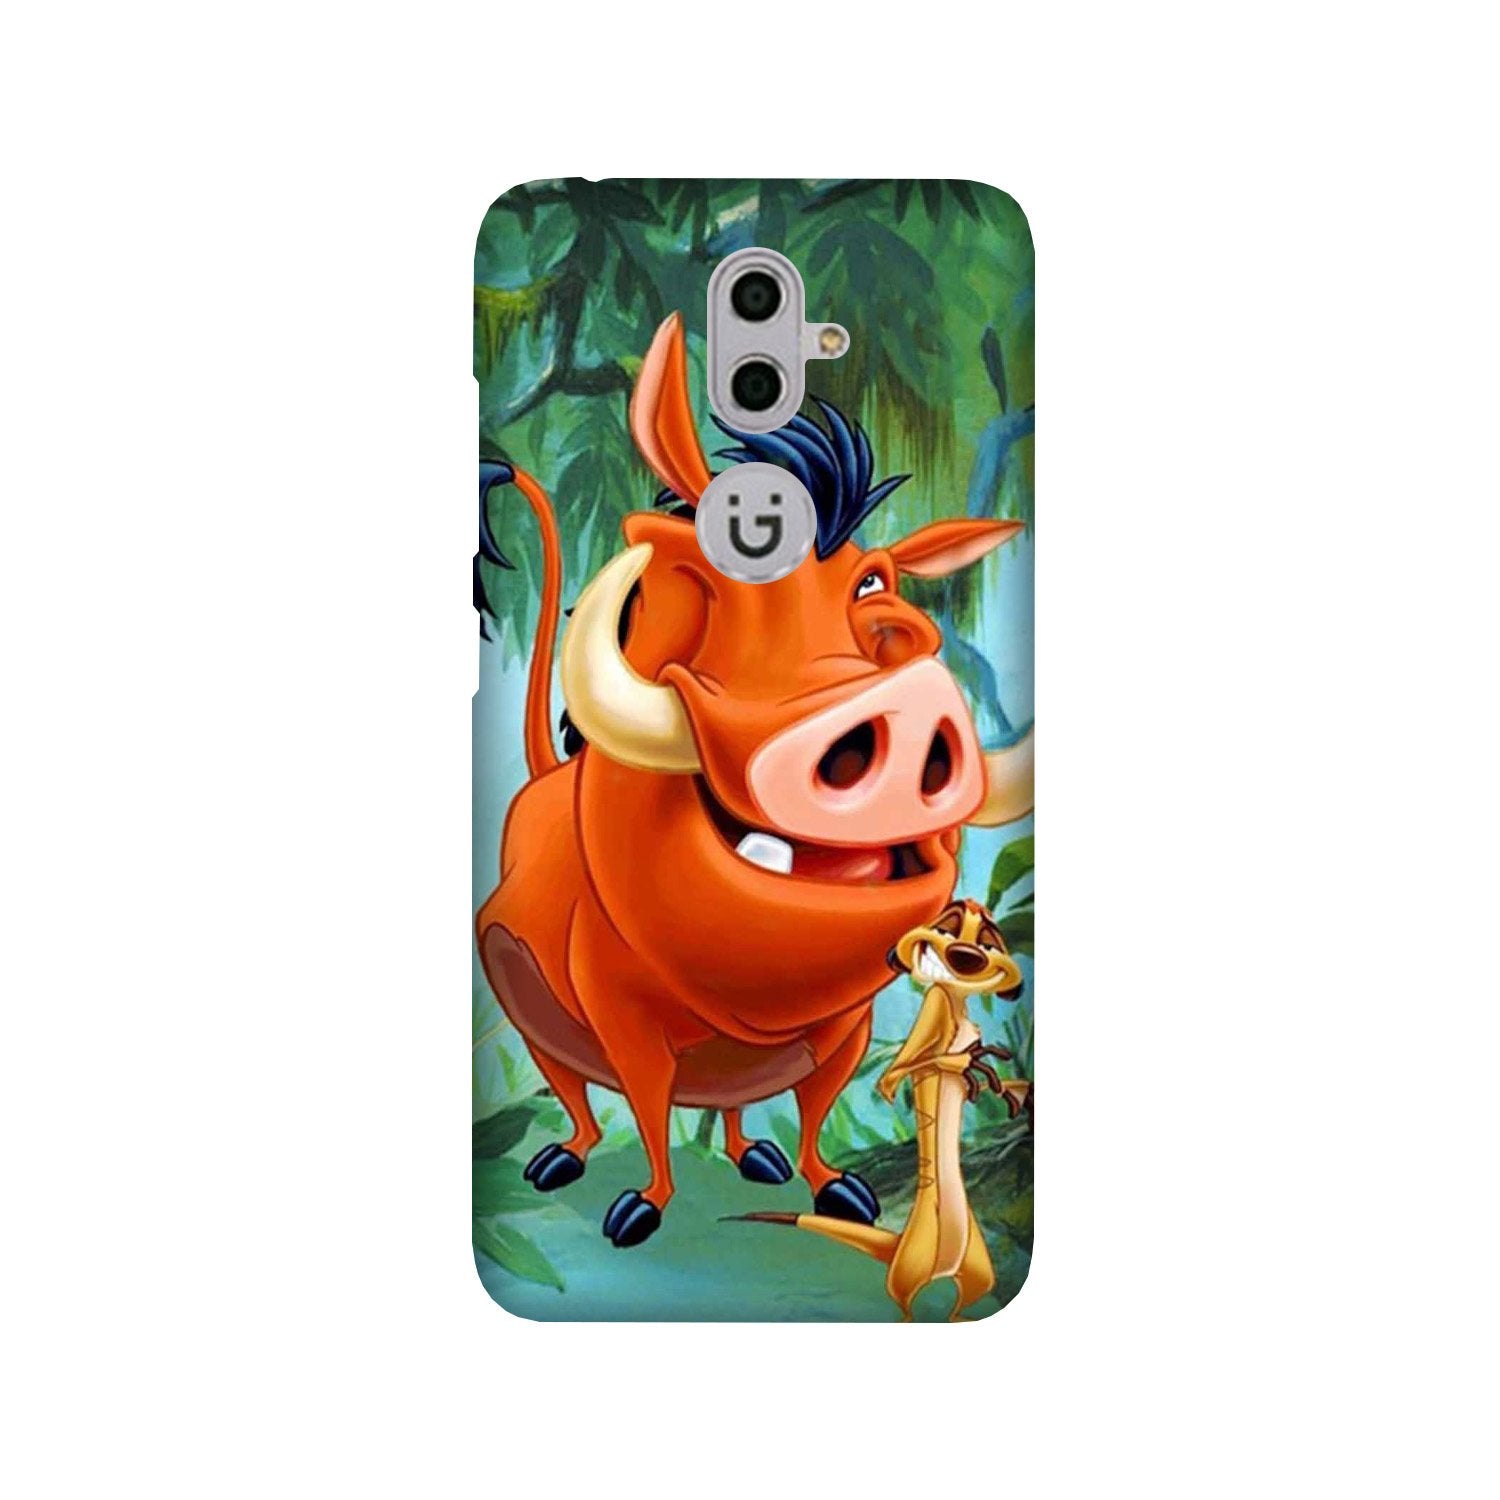 Timon and Pumbaa Mobile Back Case for Gionee S9 (Design - 305)